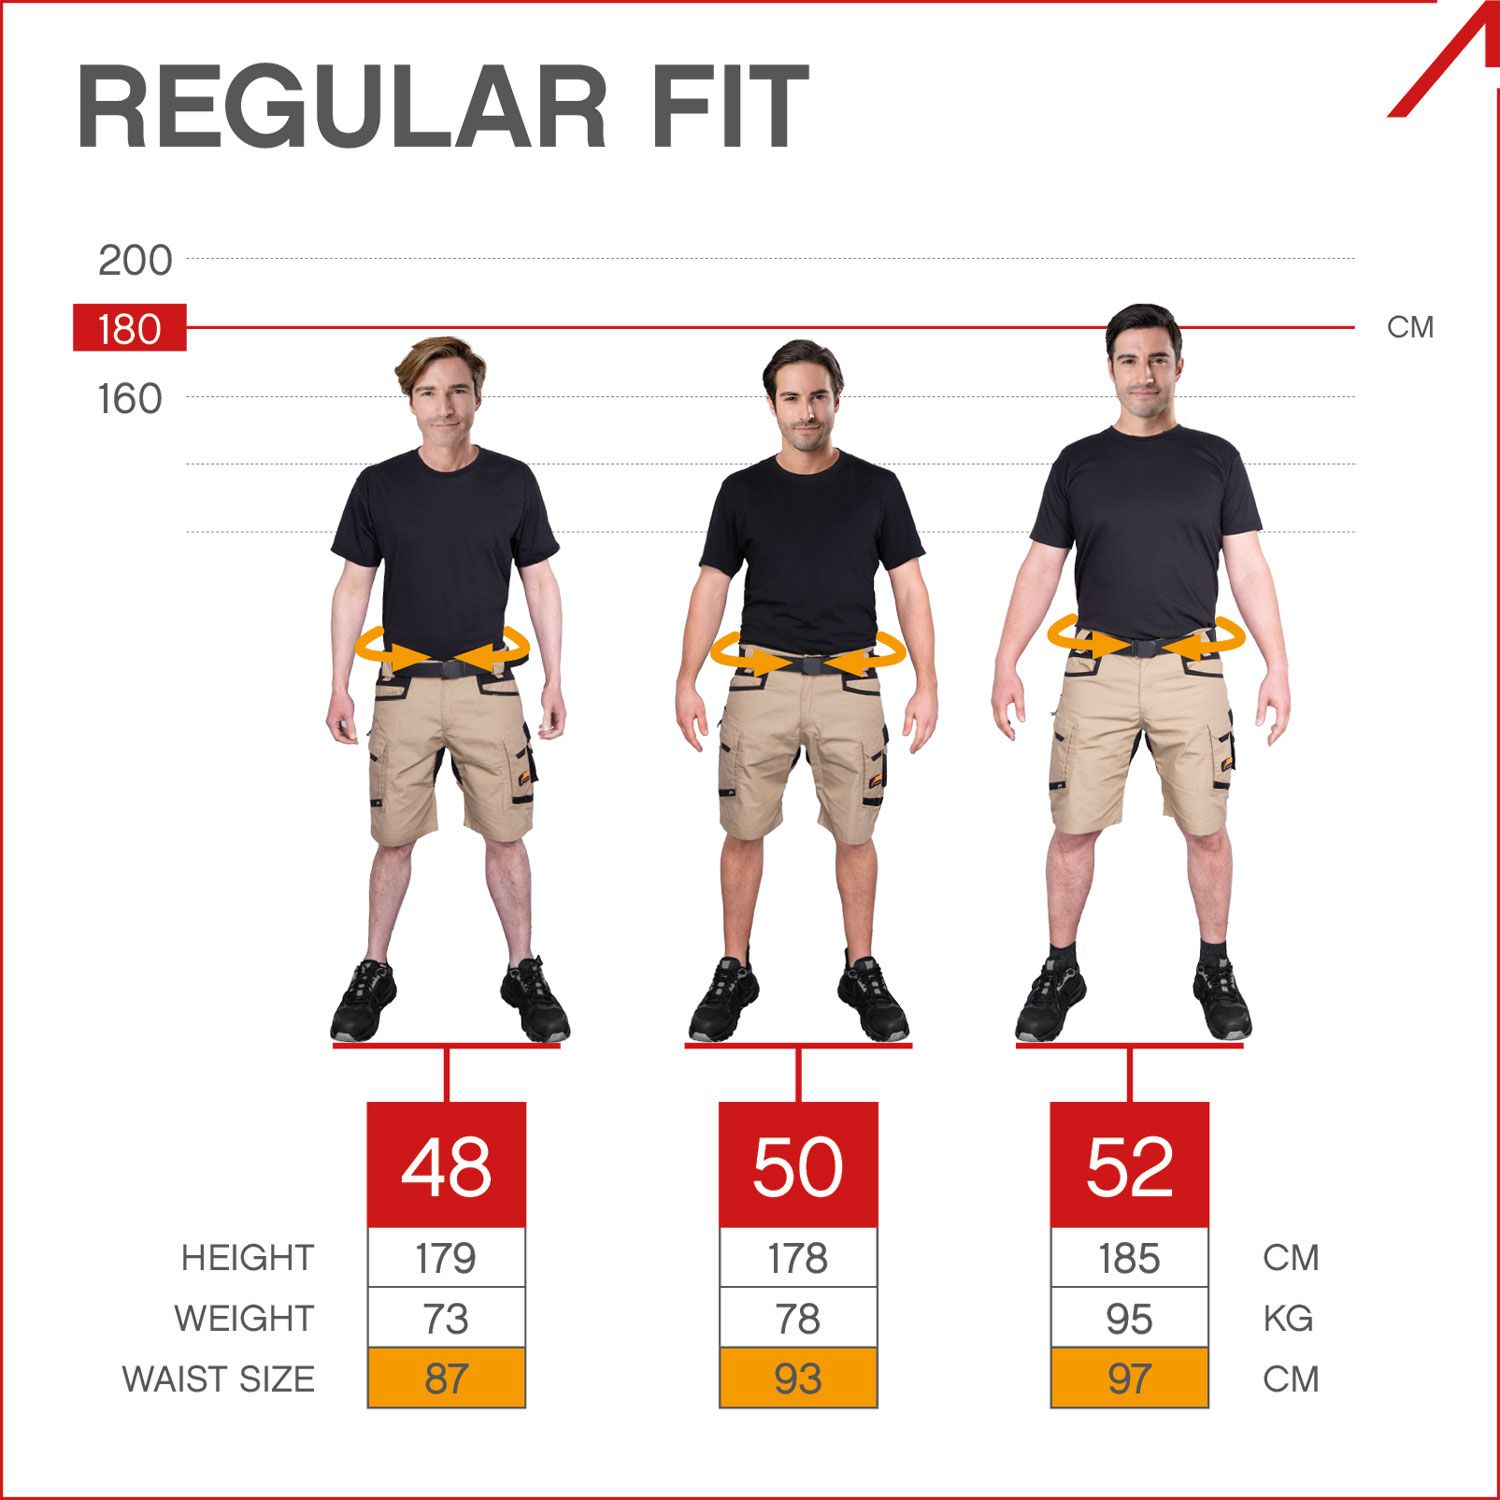 ACE Constructor Men's Work Trousers Short - Work Pants with Cargo Pockets & Stretch Waistband for Summer - Olive - 52